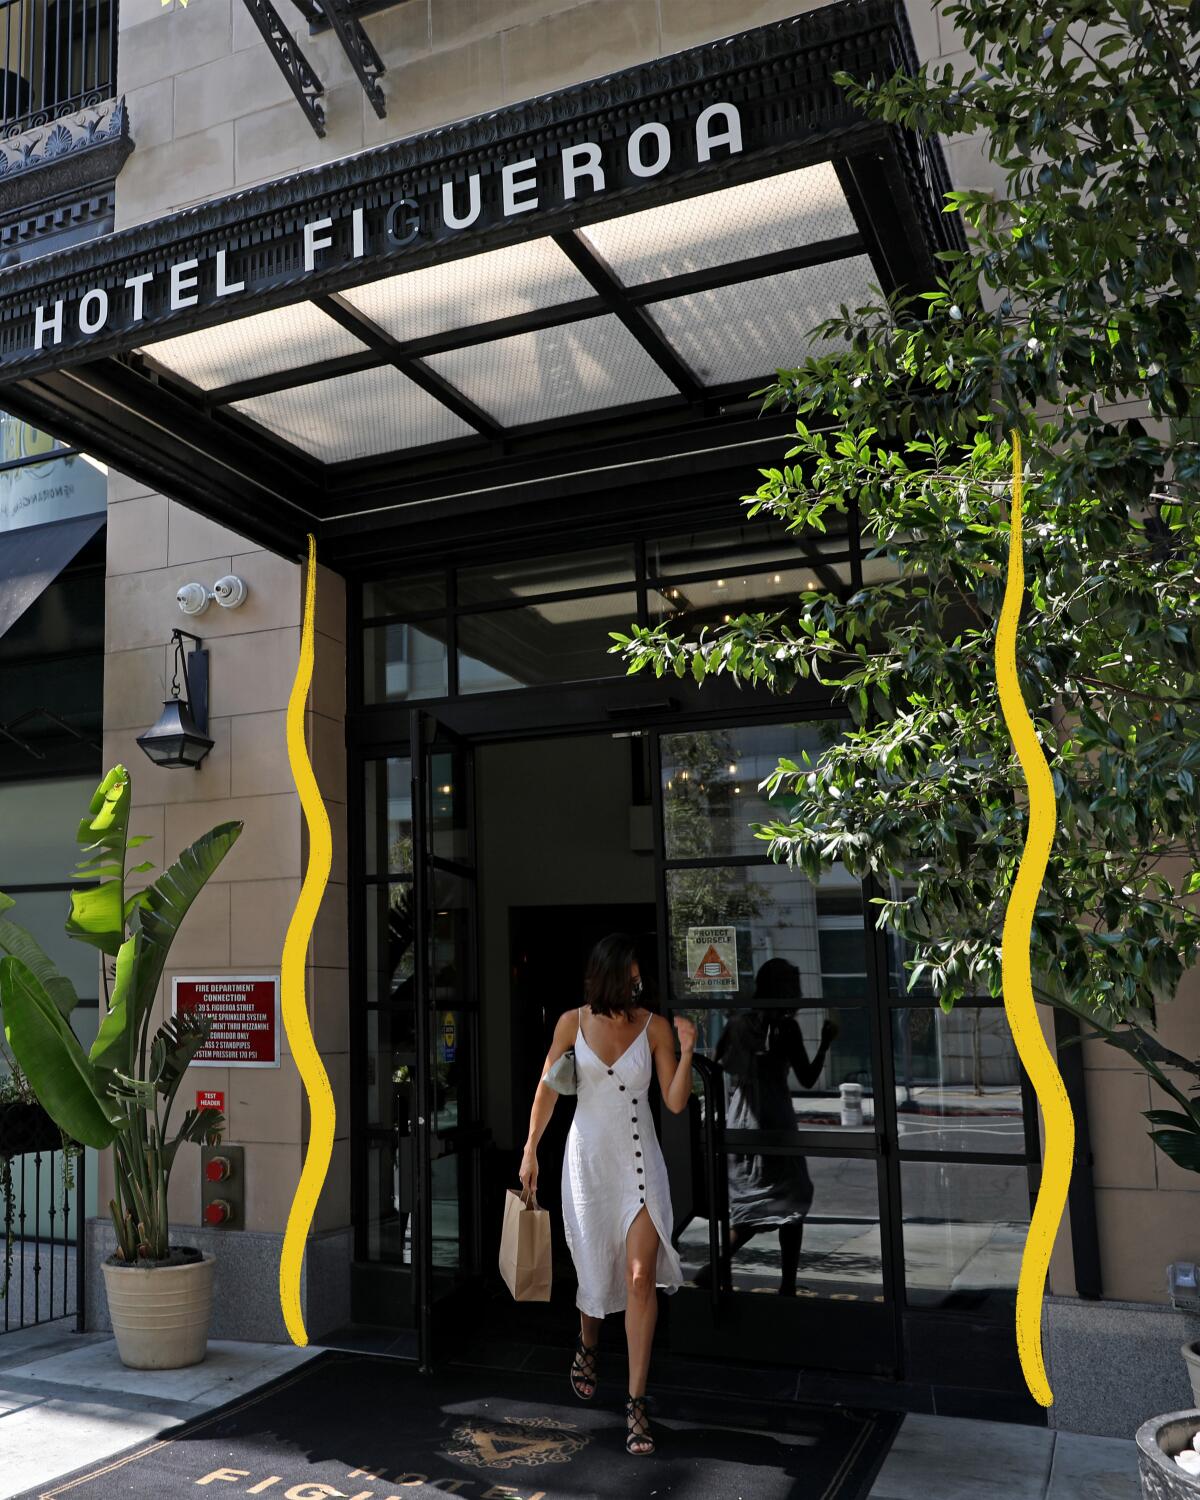 The Hotel Figueroa in downtown Los Angeles